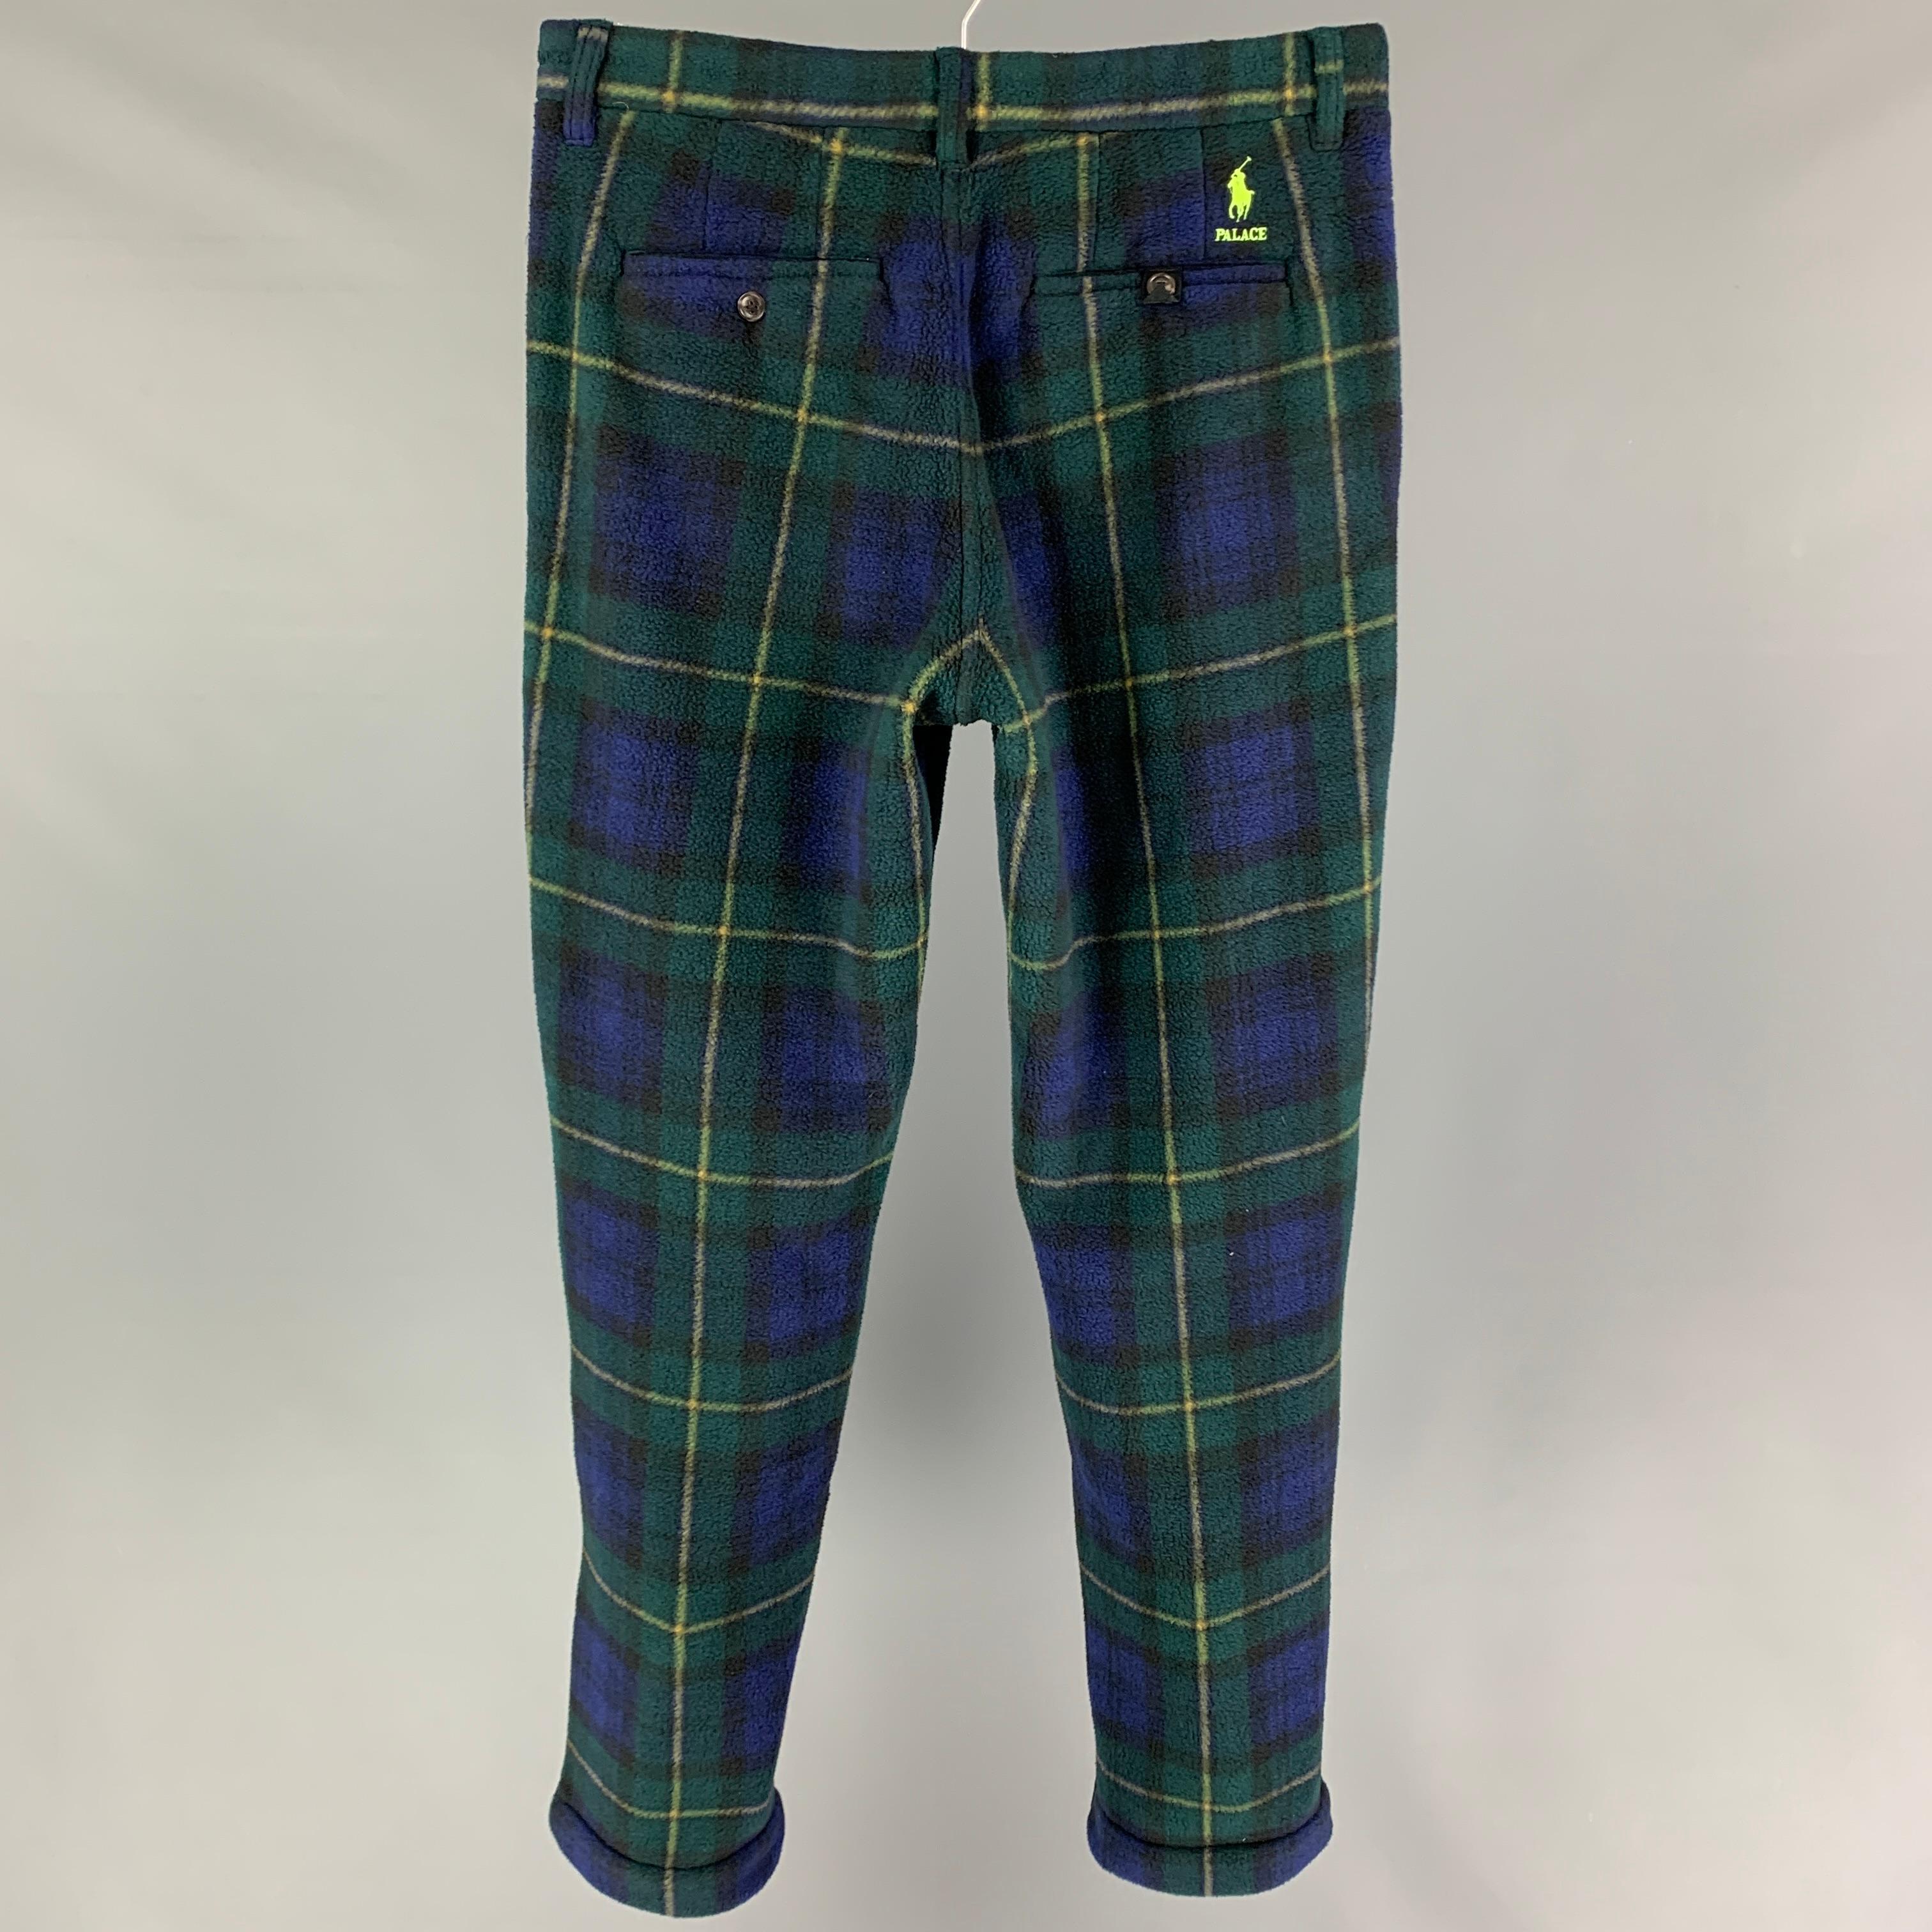 POLO by RALPH LAUREN x PALACE pants comes in a blackwatch plaid polyester featuring a classic fit, flat front, and a zip fly closure. 

New With Tags.
Marked: 30

Measurements:

Waist: 32 in.
Rise: 11.5 in.
Inseam: 33 in. 